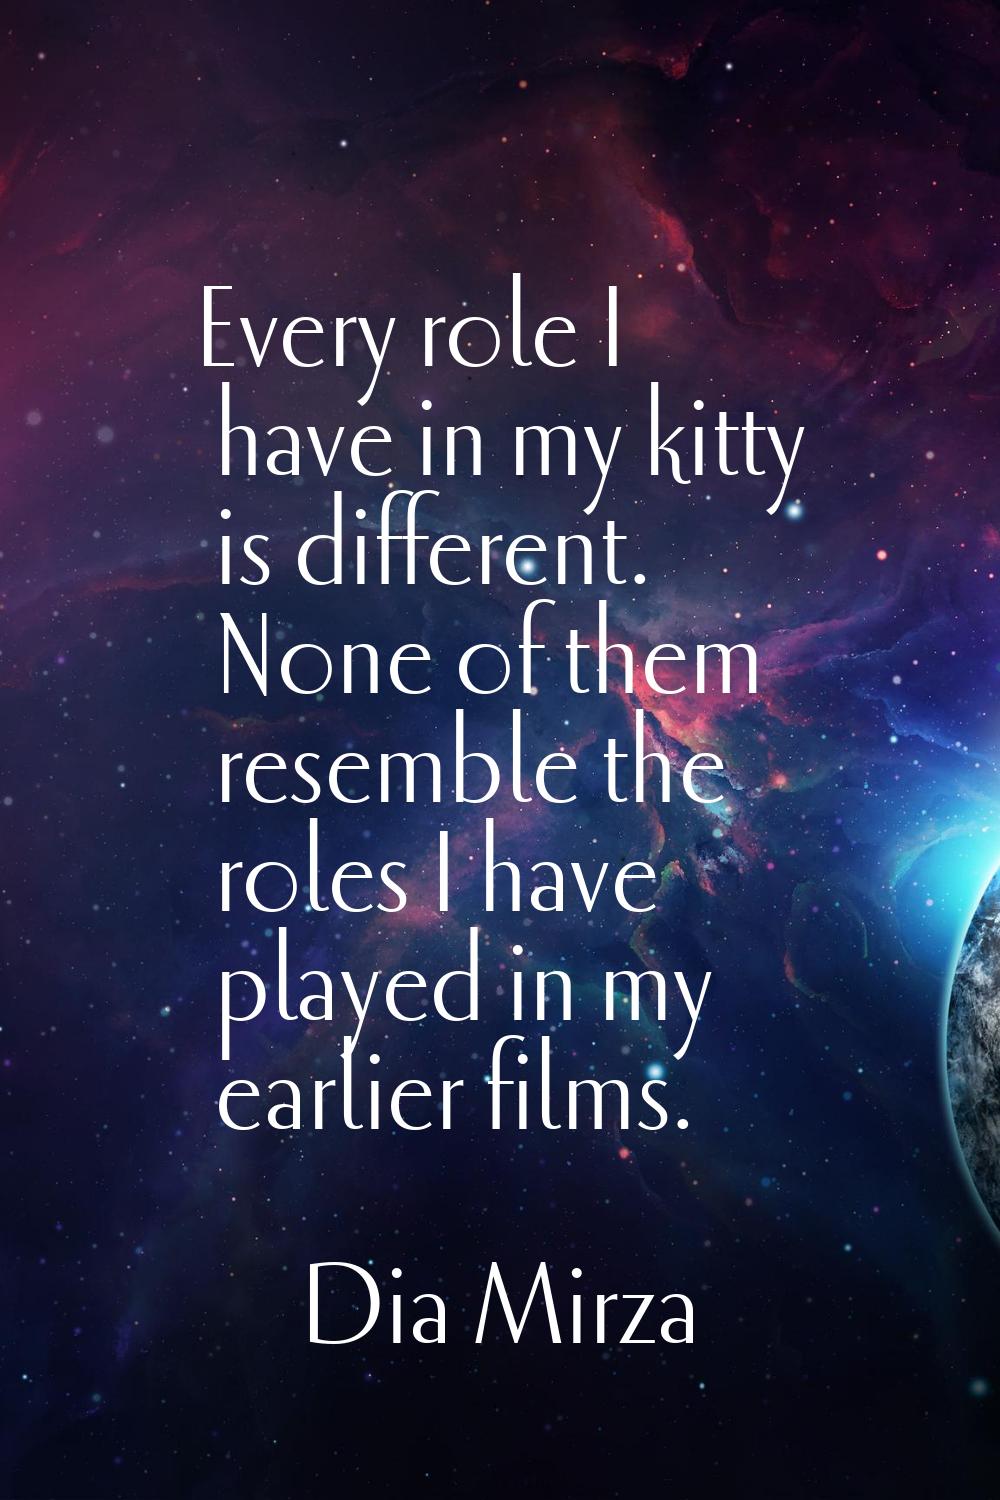 Every role I have in my kitty is different. None of them resemble the roles I have played in my ear